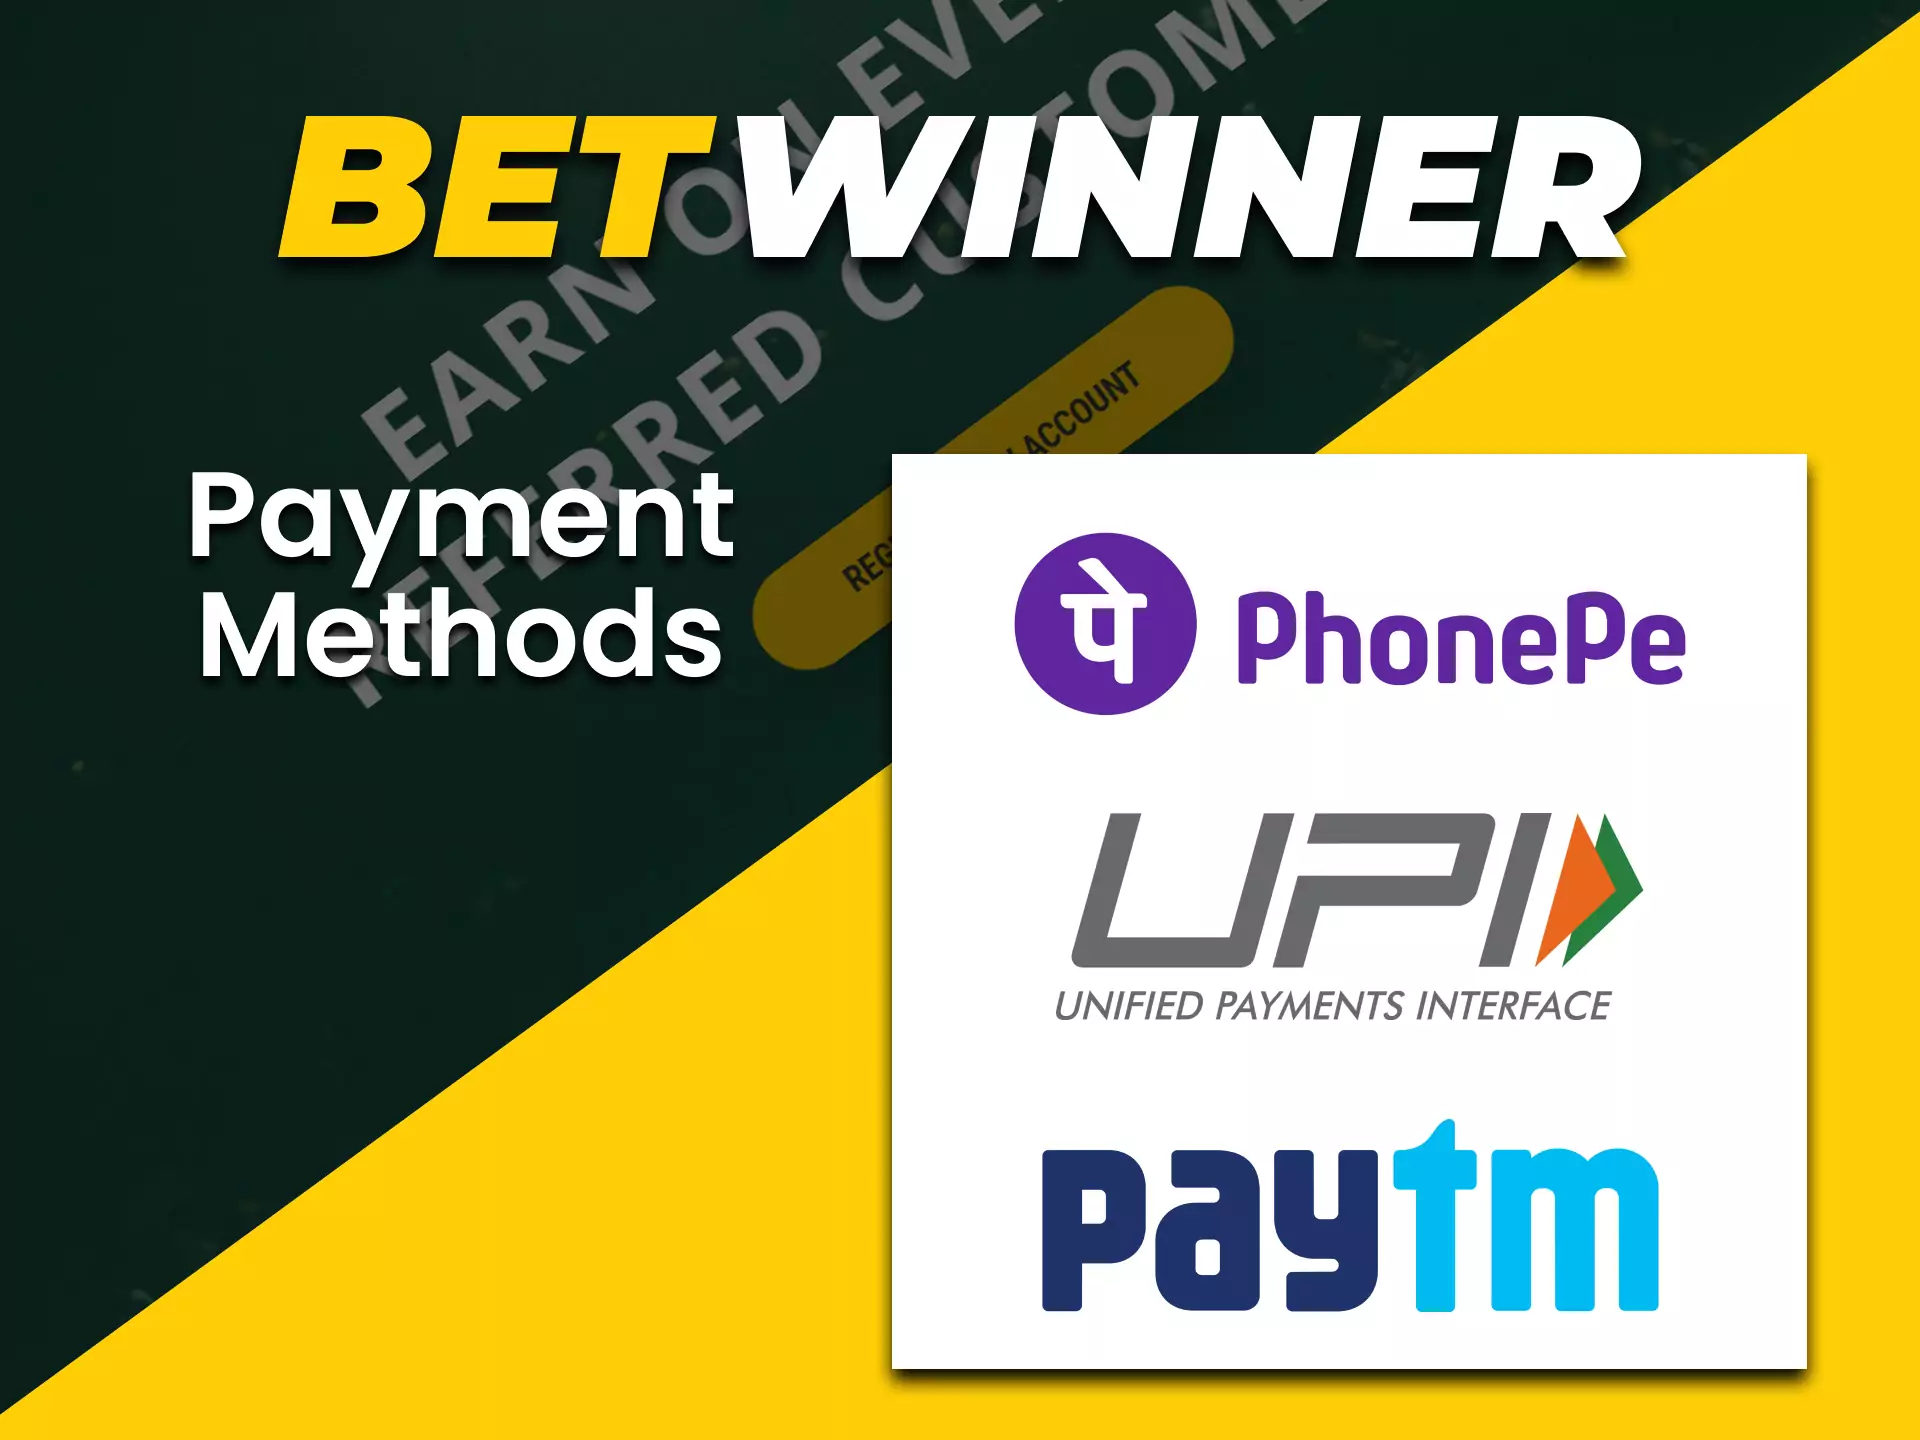 You can withdraw money from the Betwinner account with Indian payment systems.